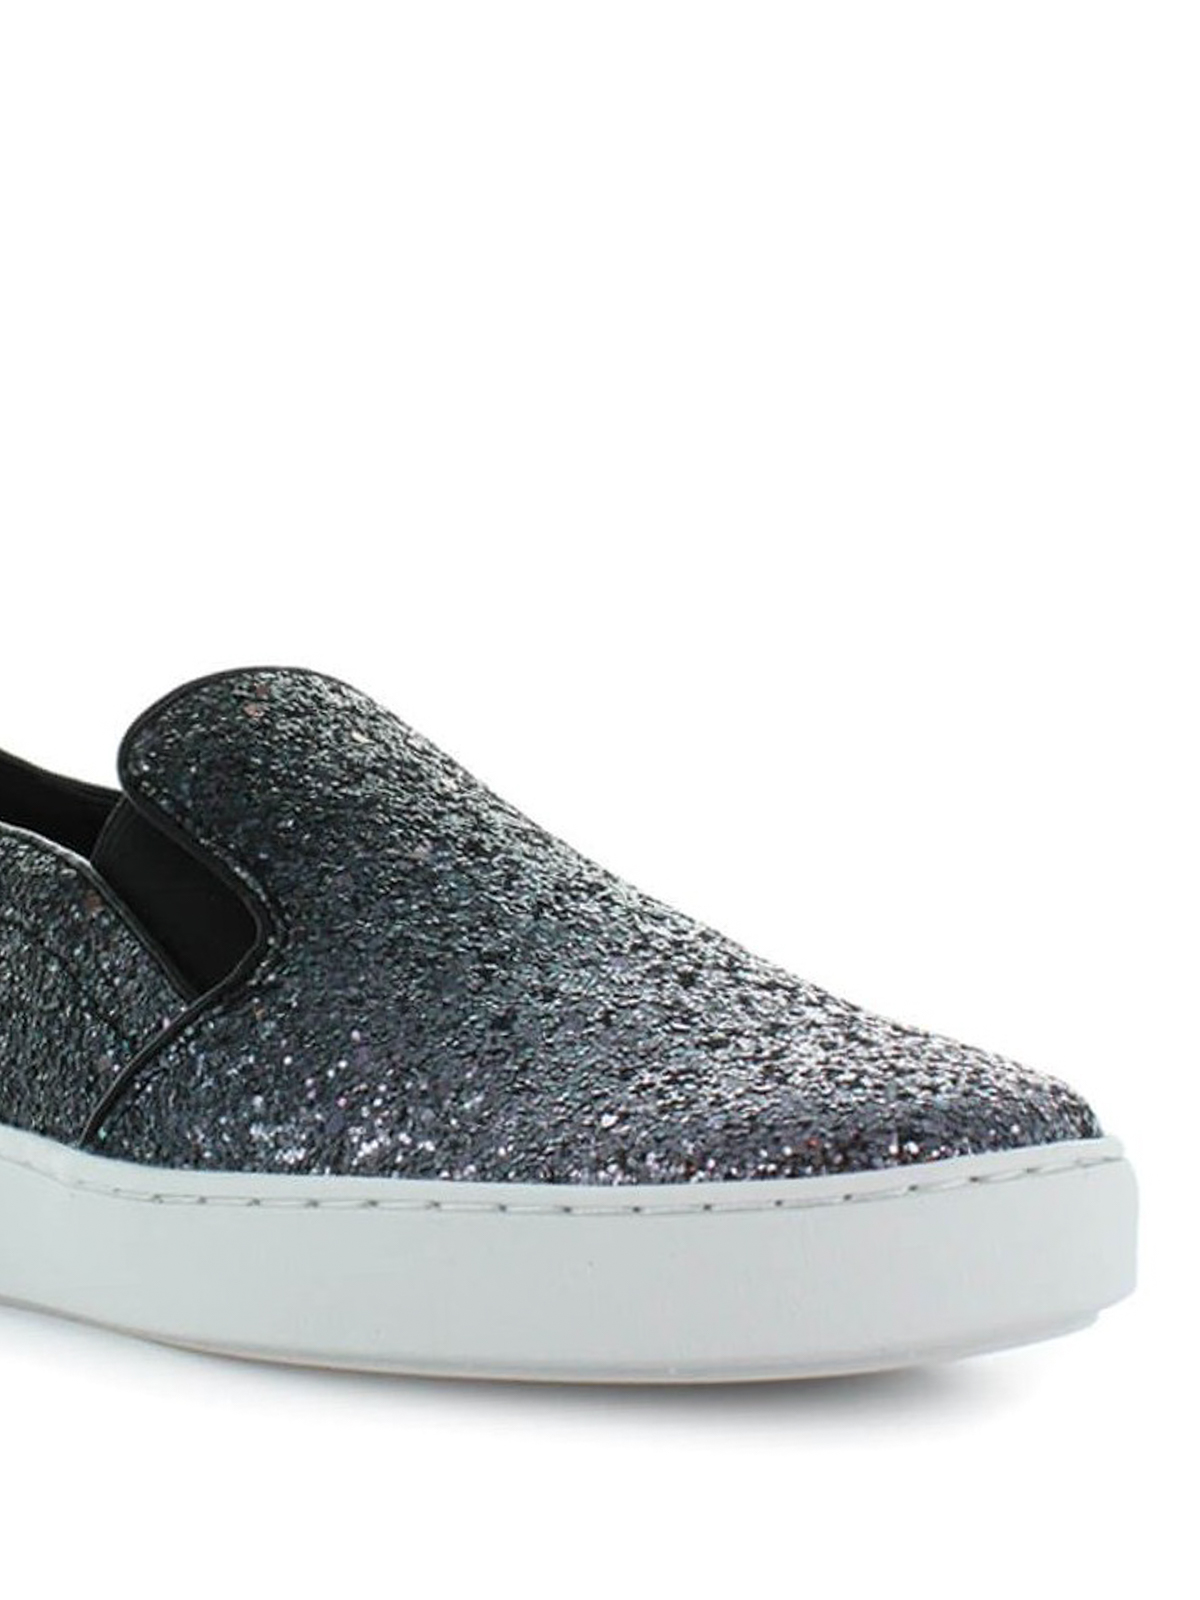 Trainers Michael Kors - Keaton all-over glitter leather slip-ons -  43T8KTFP1D041